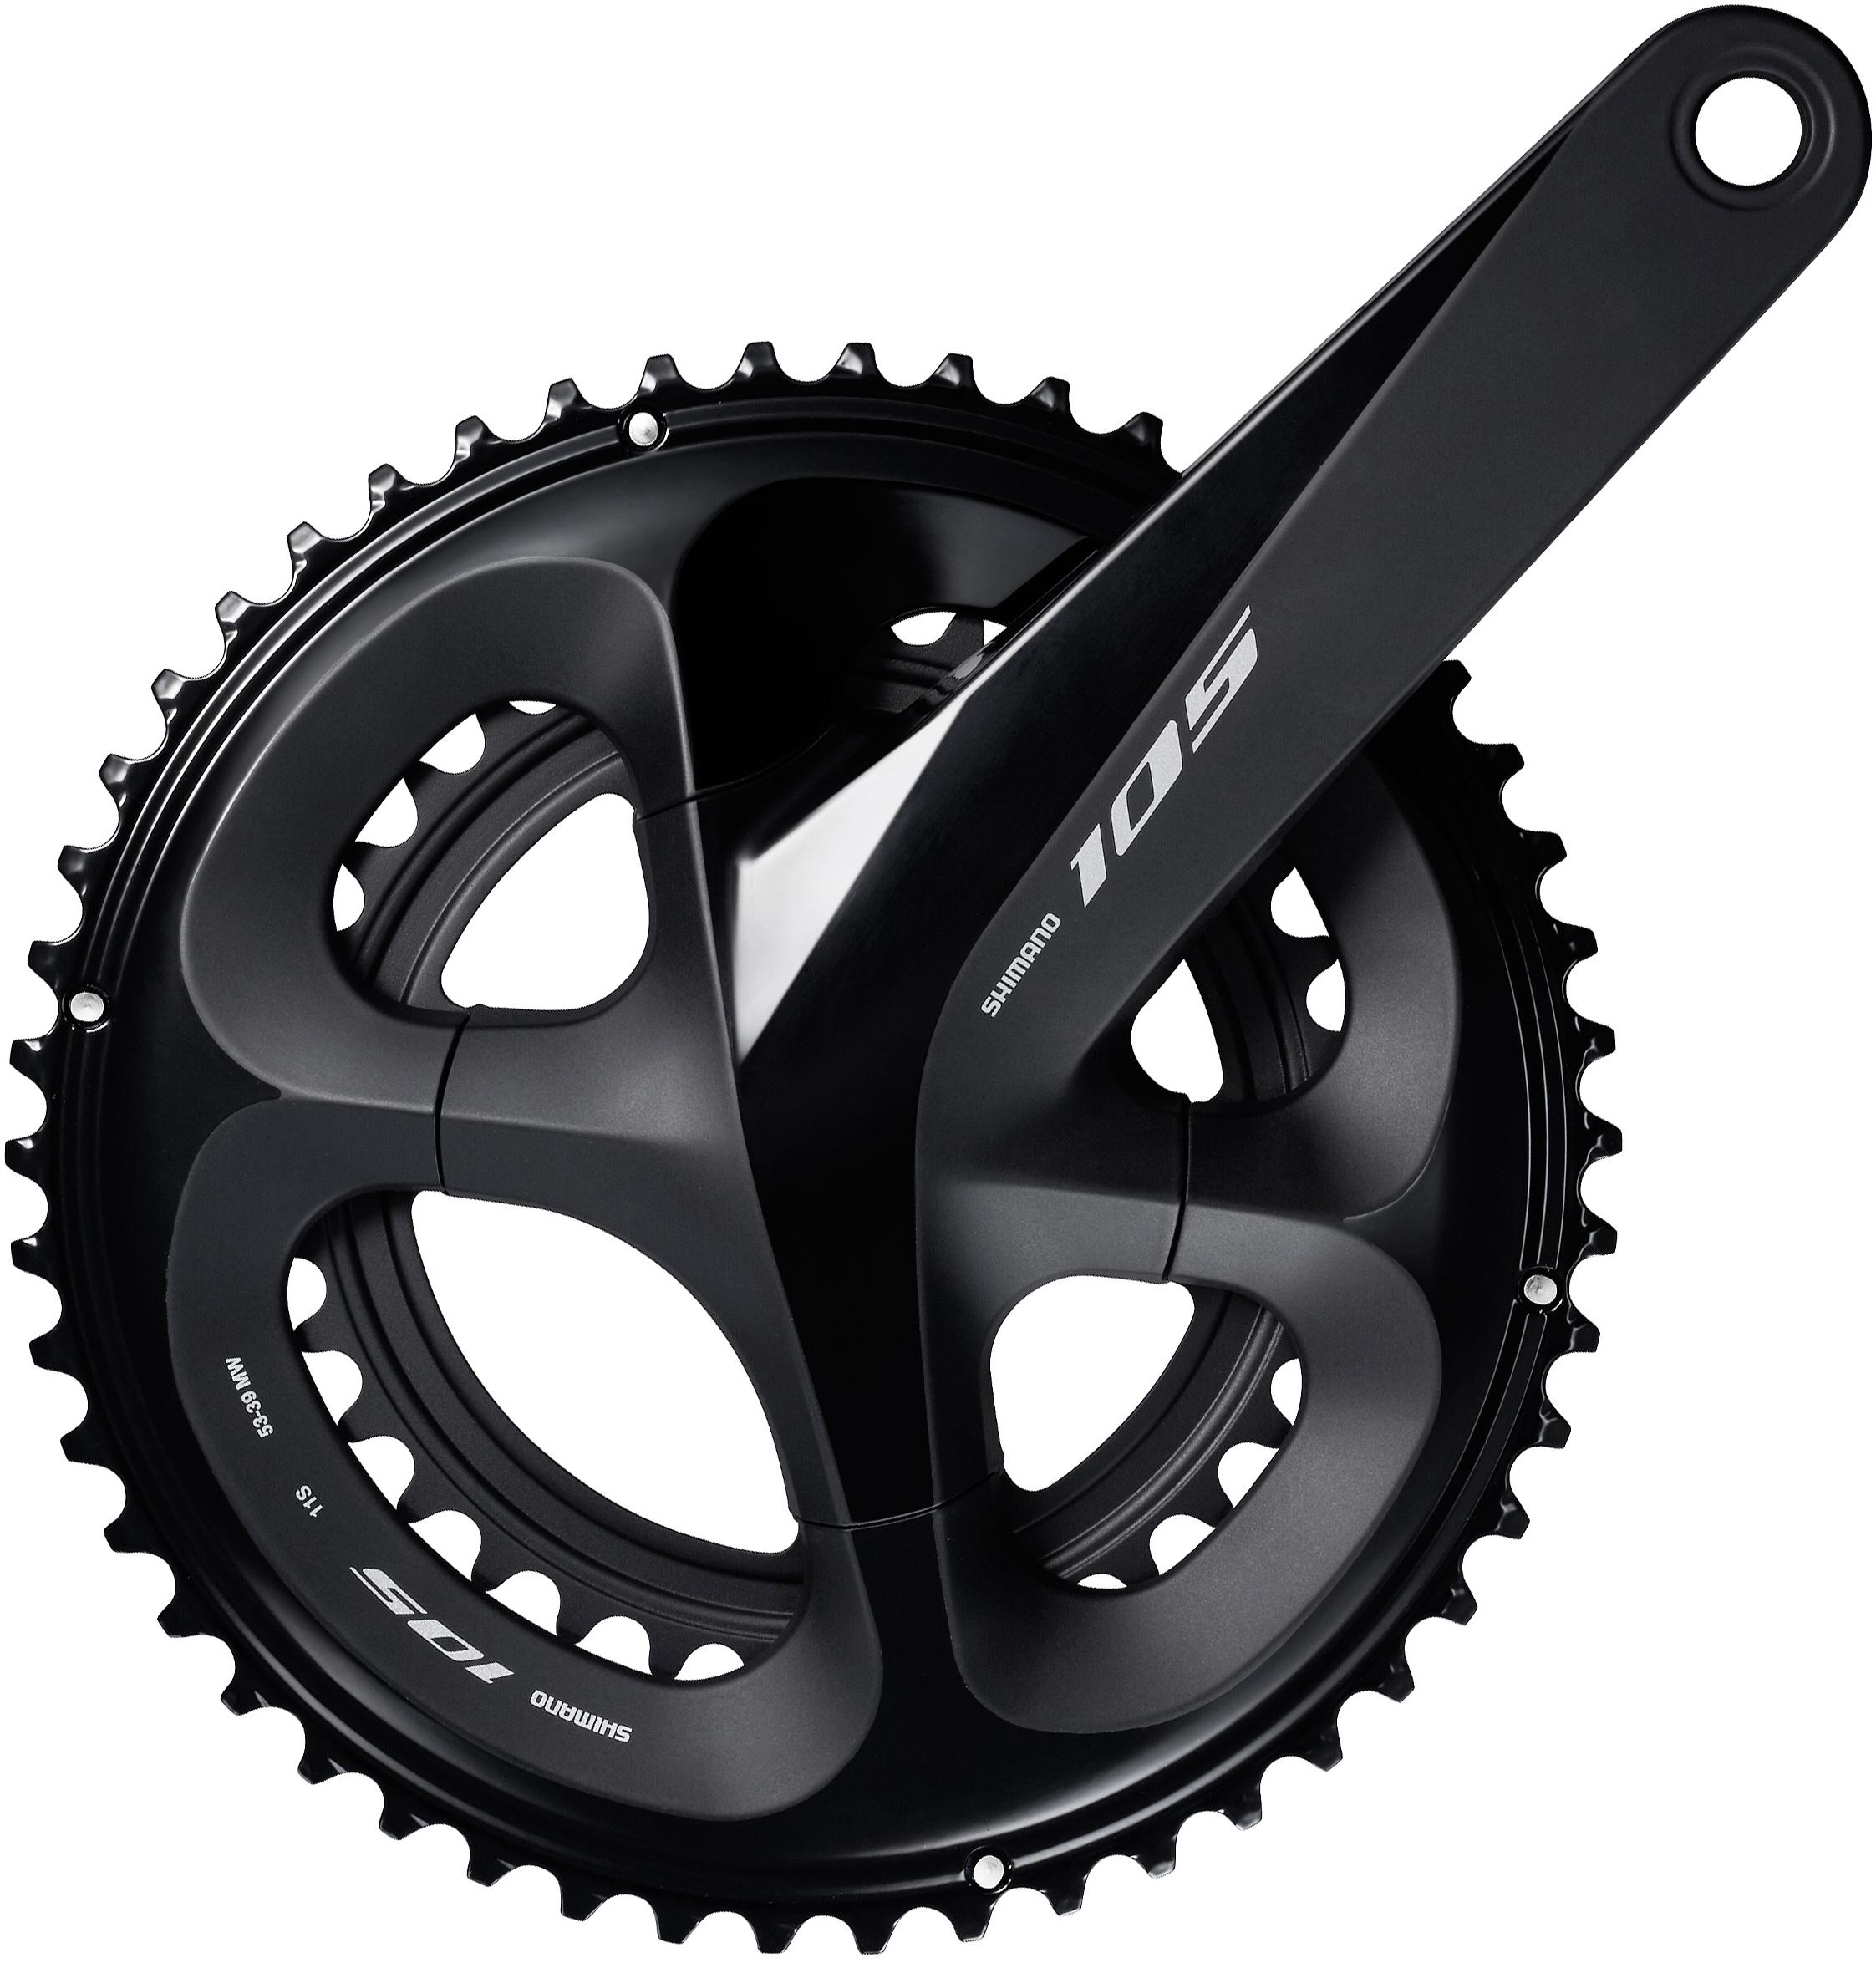 Shimano 105 R7000 11sp Compact Double Chainset  Black